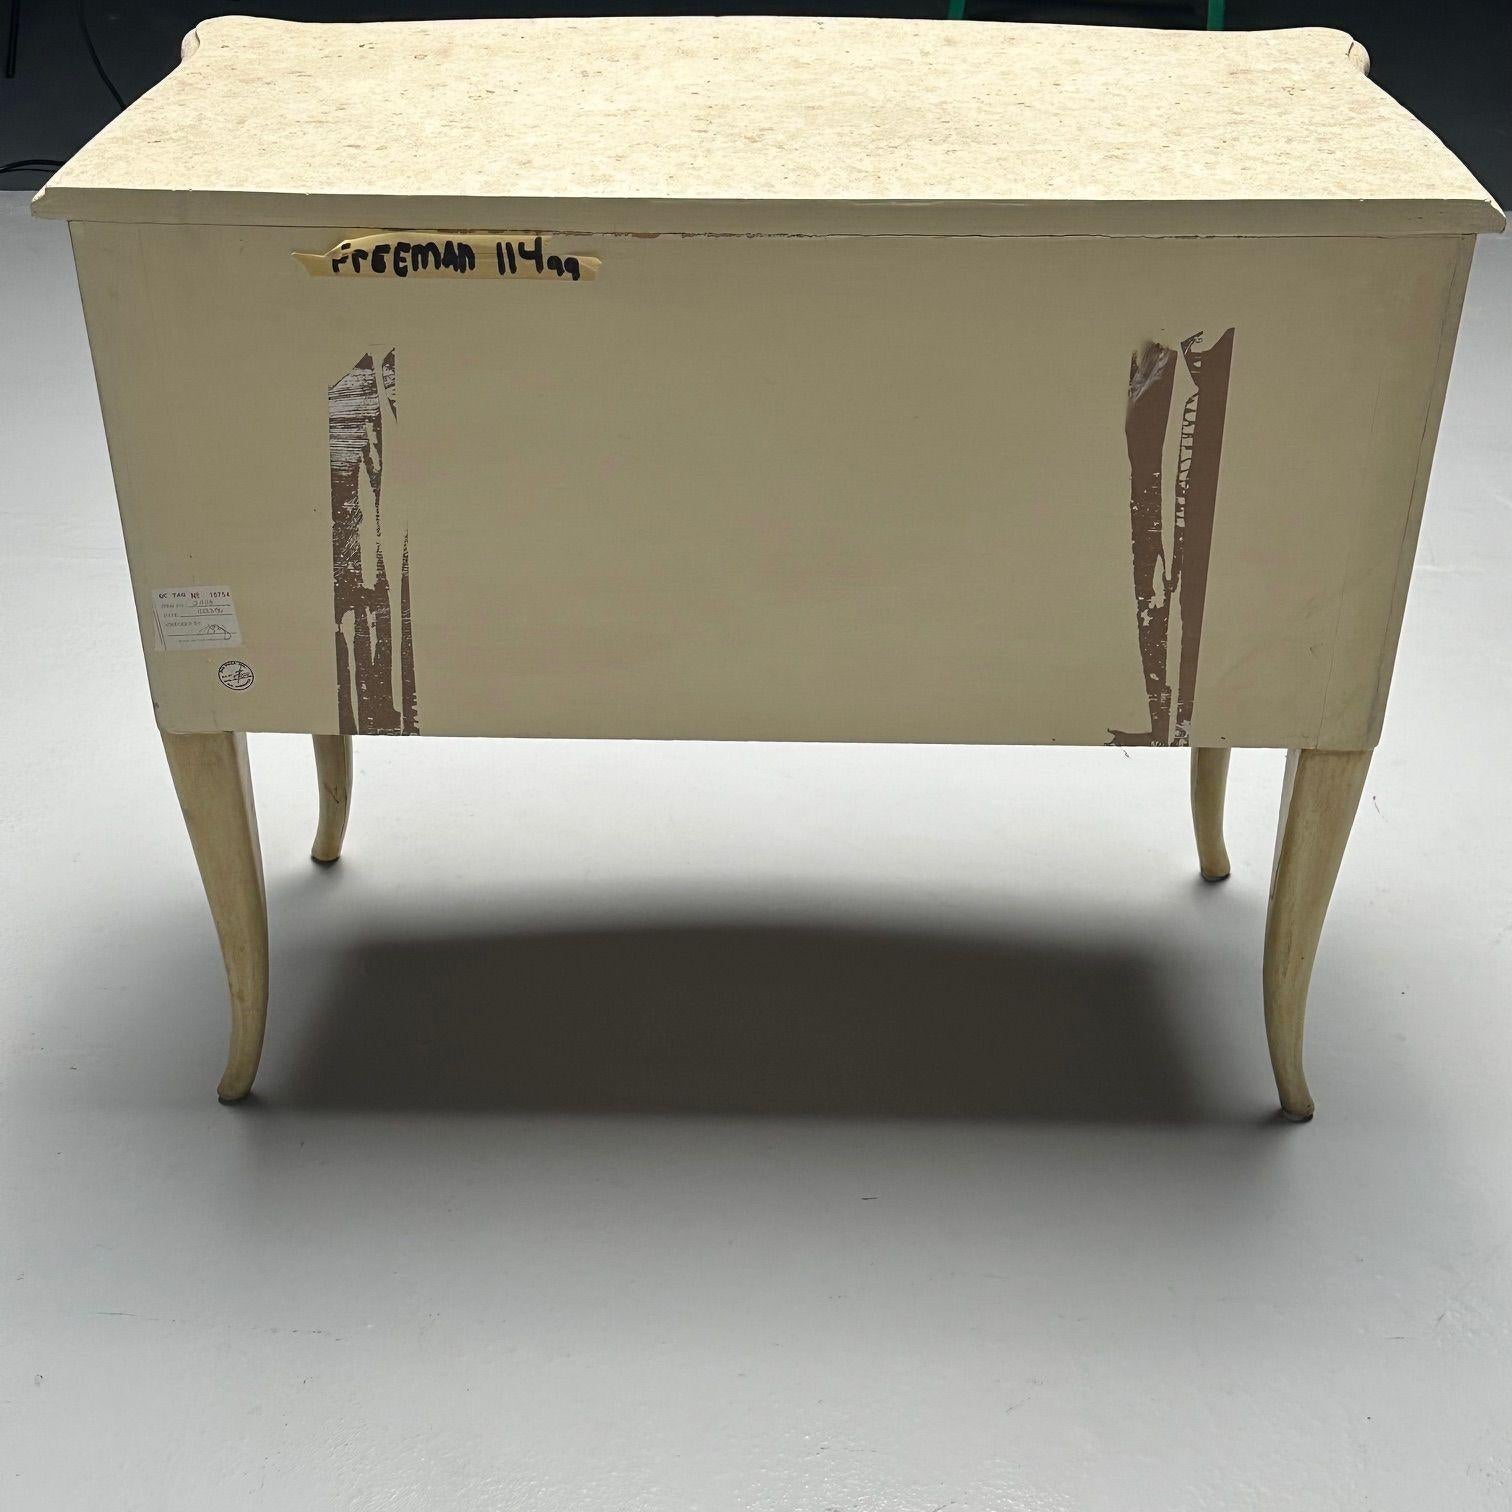 Andre Groult Style, Art Deco, Commodes, Beige Parchment Paper, Nickel, 1990s For Sale 14